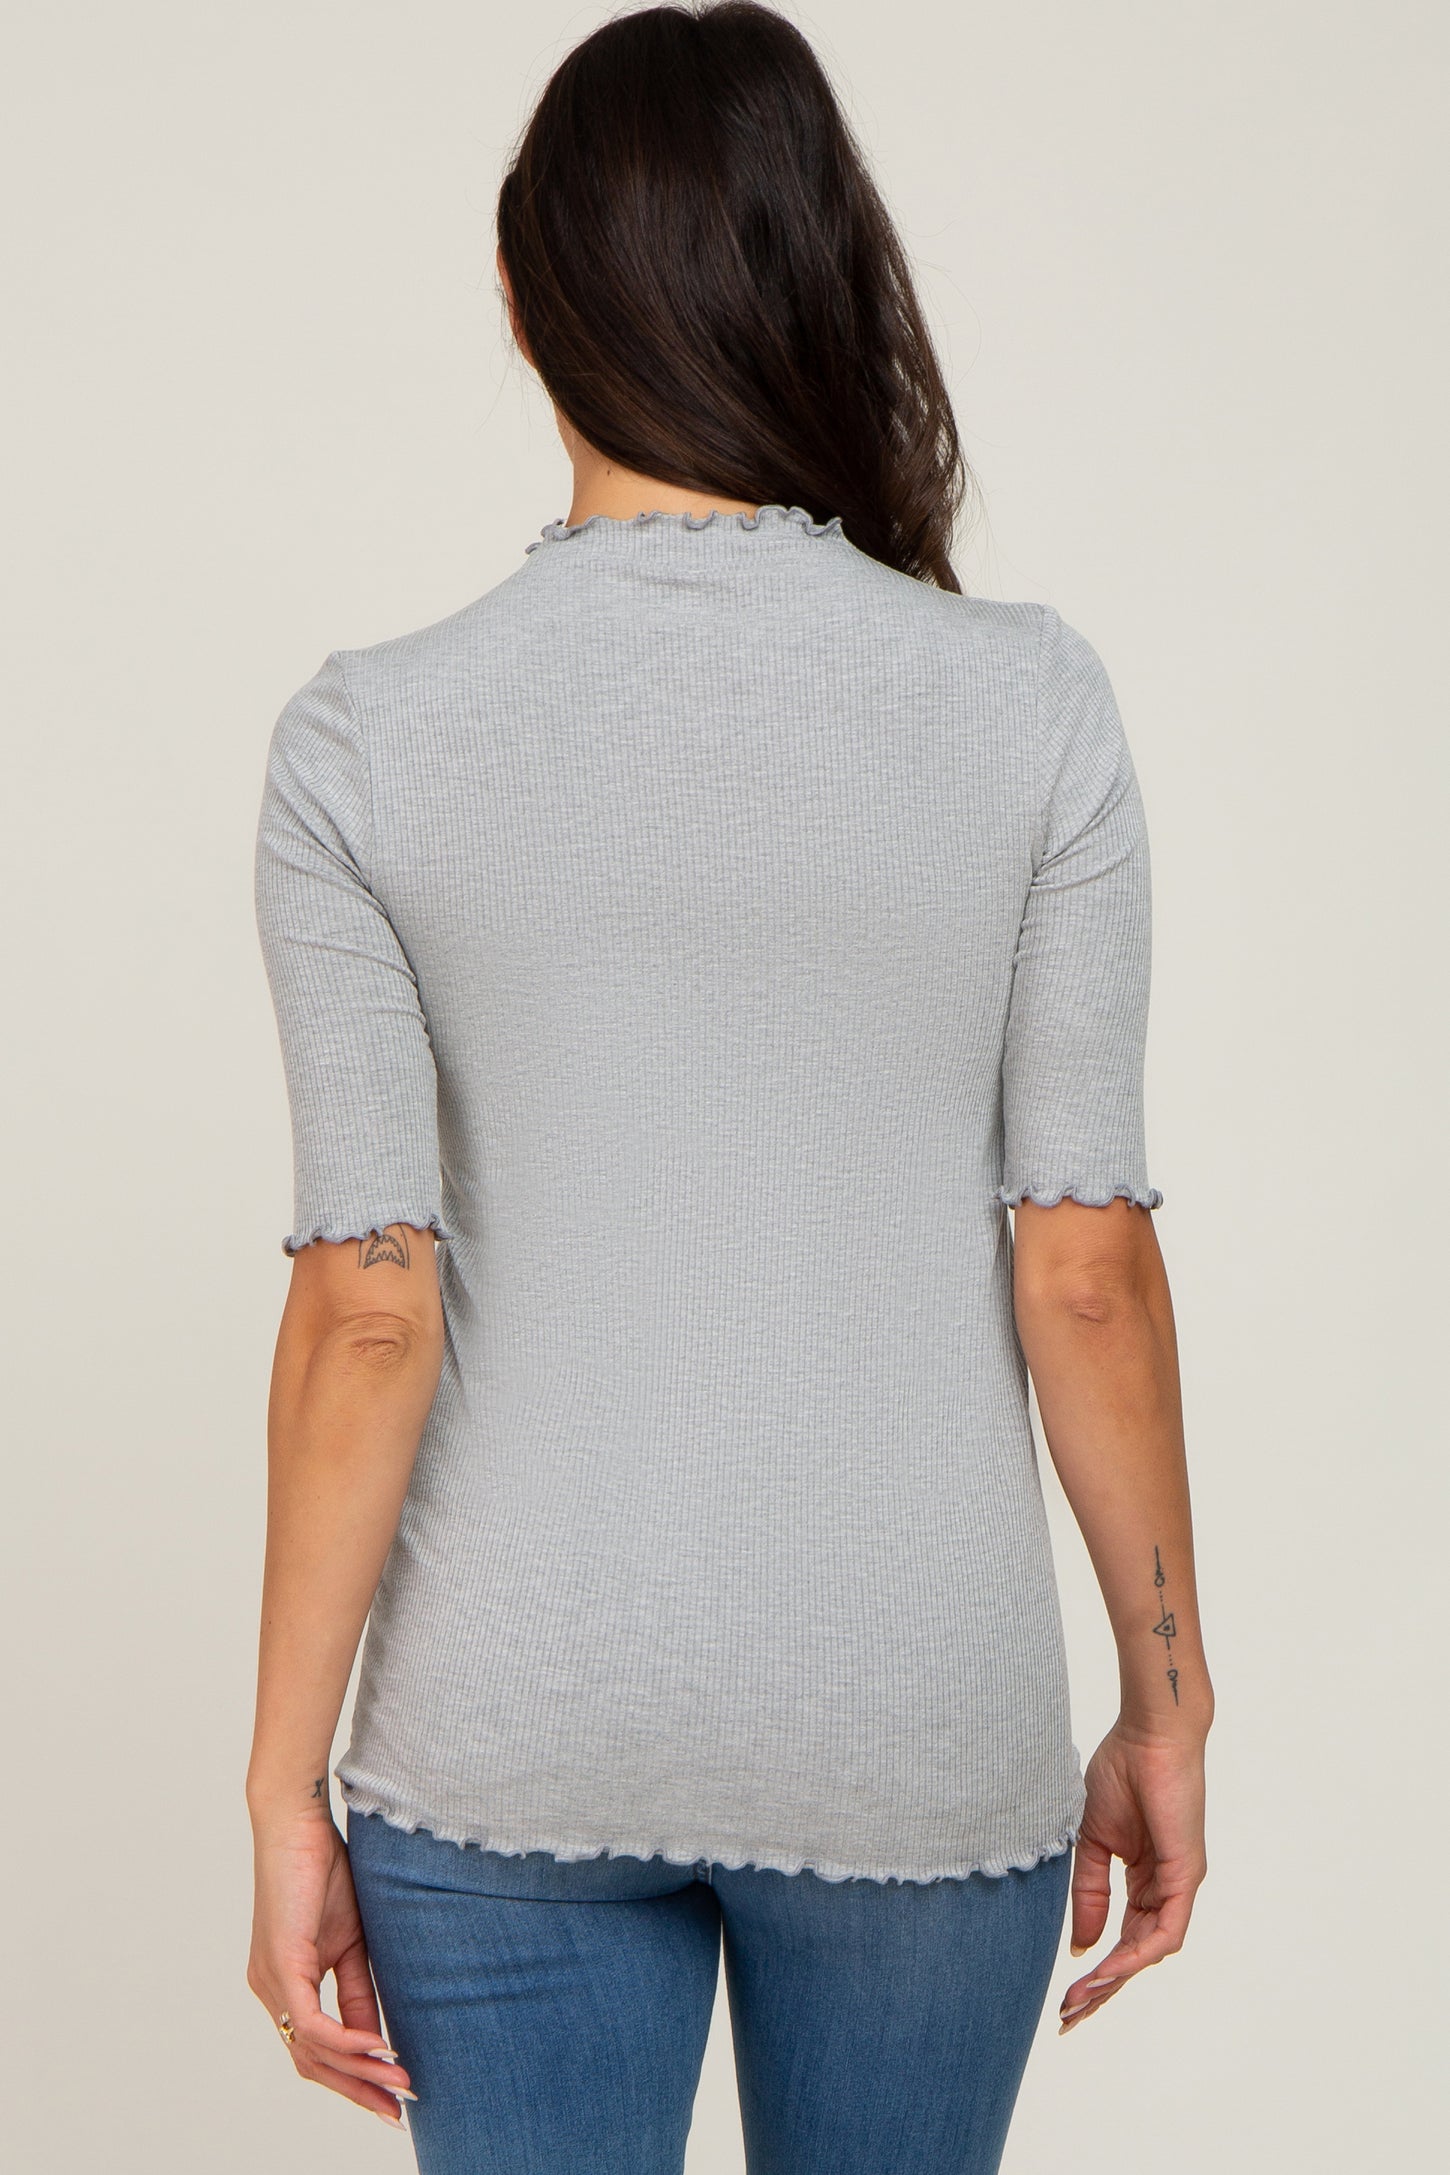 PinkBlush Heather Grey Lettuce Hem Fitted Top